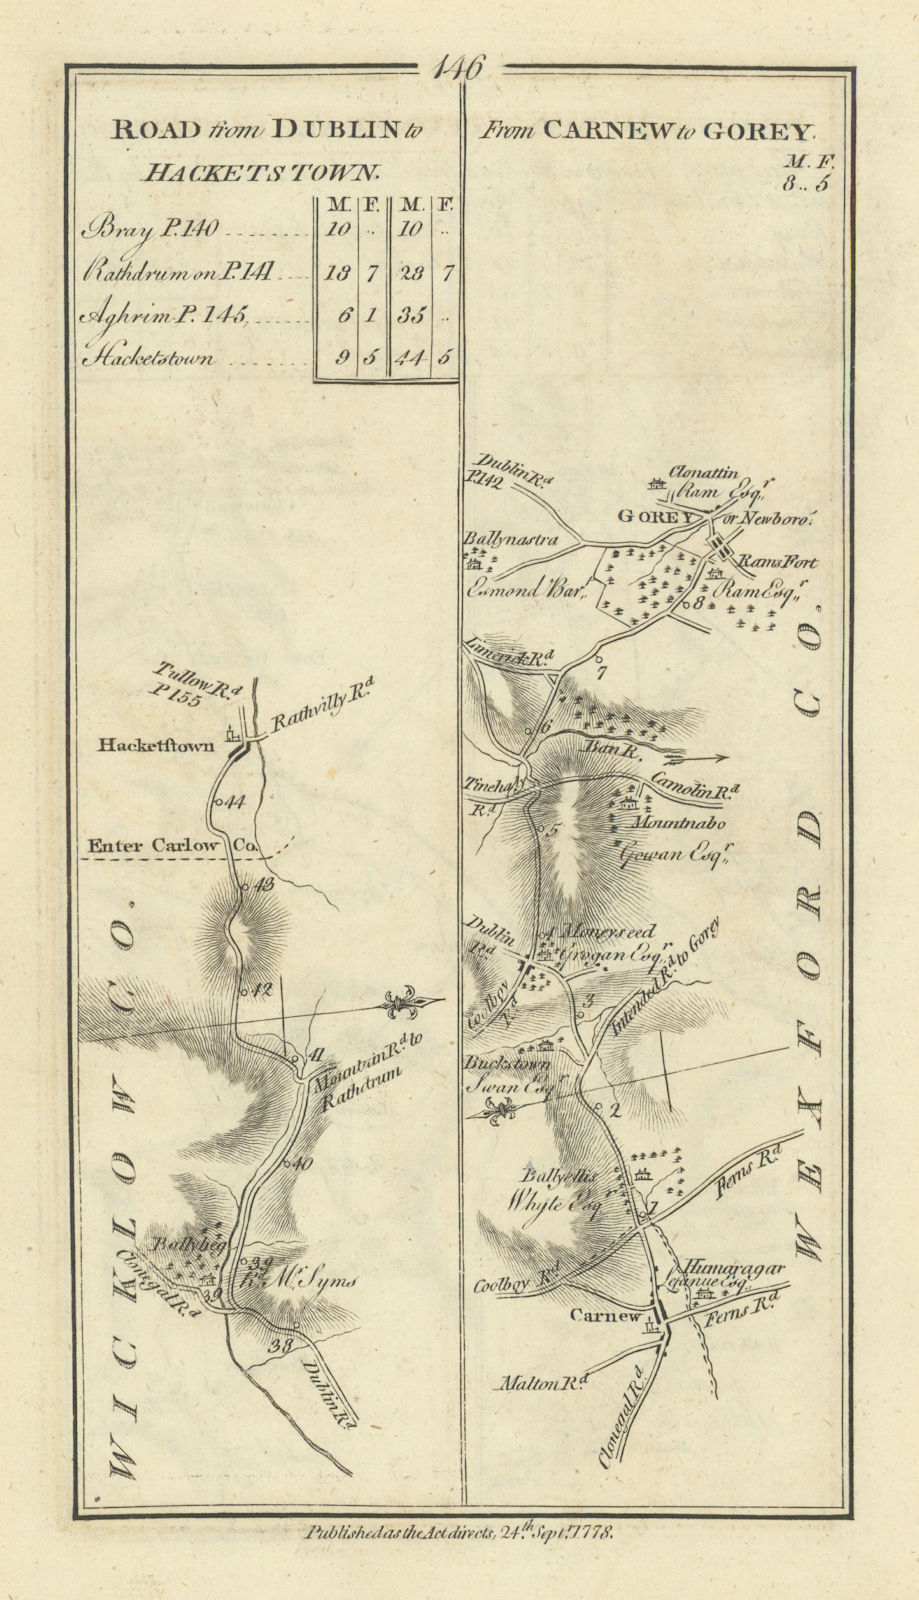 Associate Product #146 Dublin to Hacketstown / Carnew to Gorey. Wicklow. TAYLOR/SKINNER 1778 map